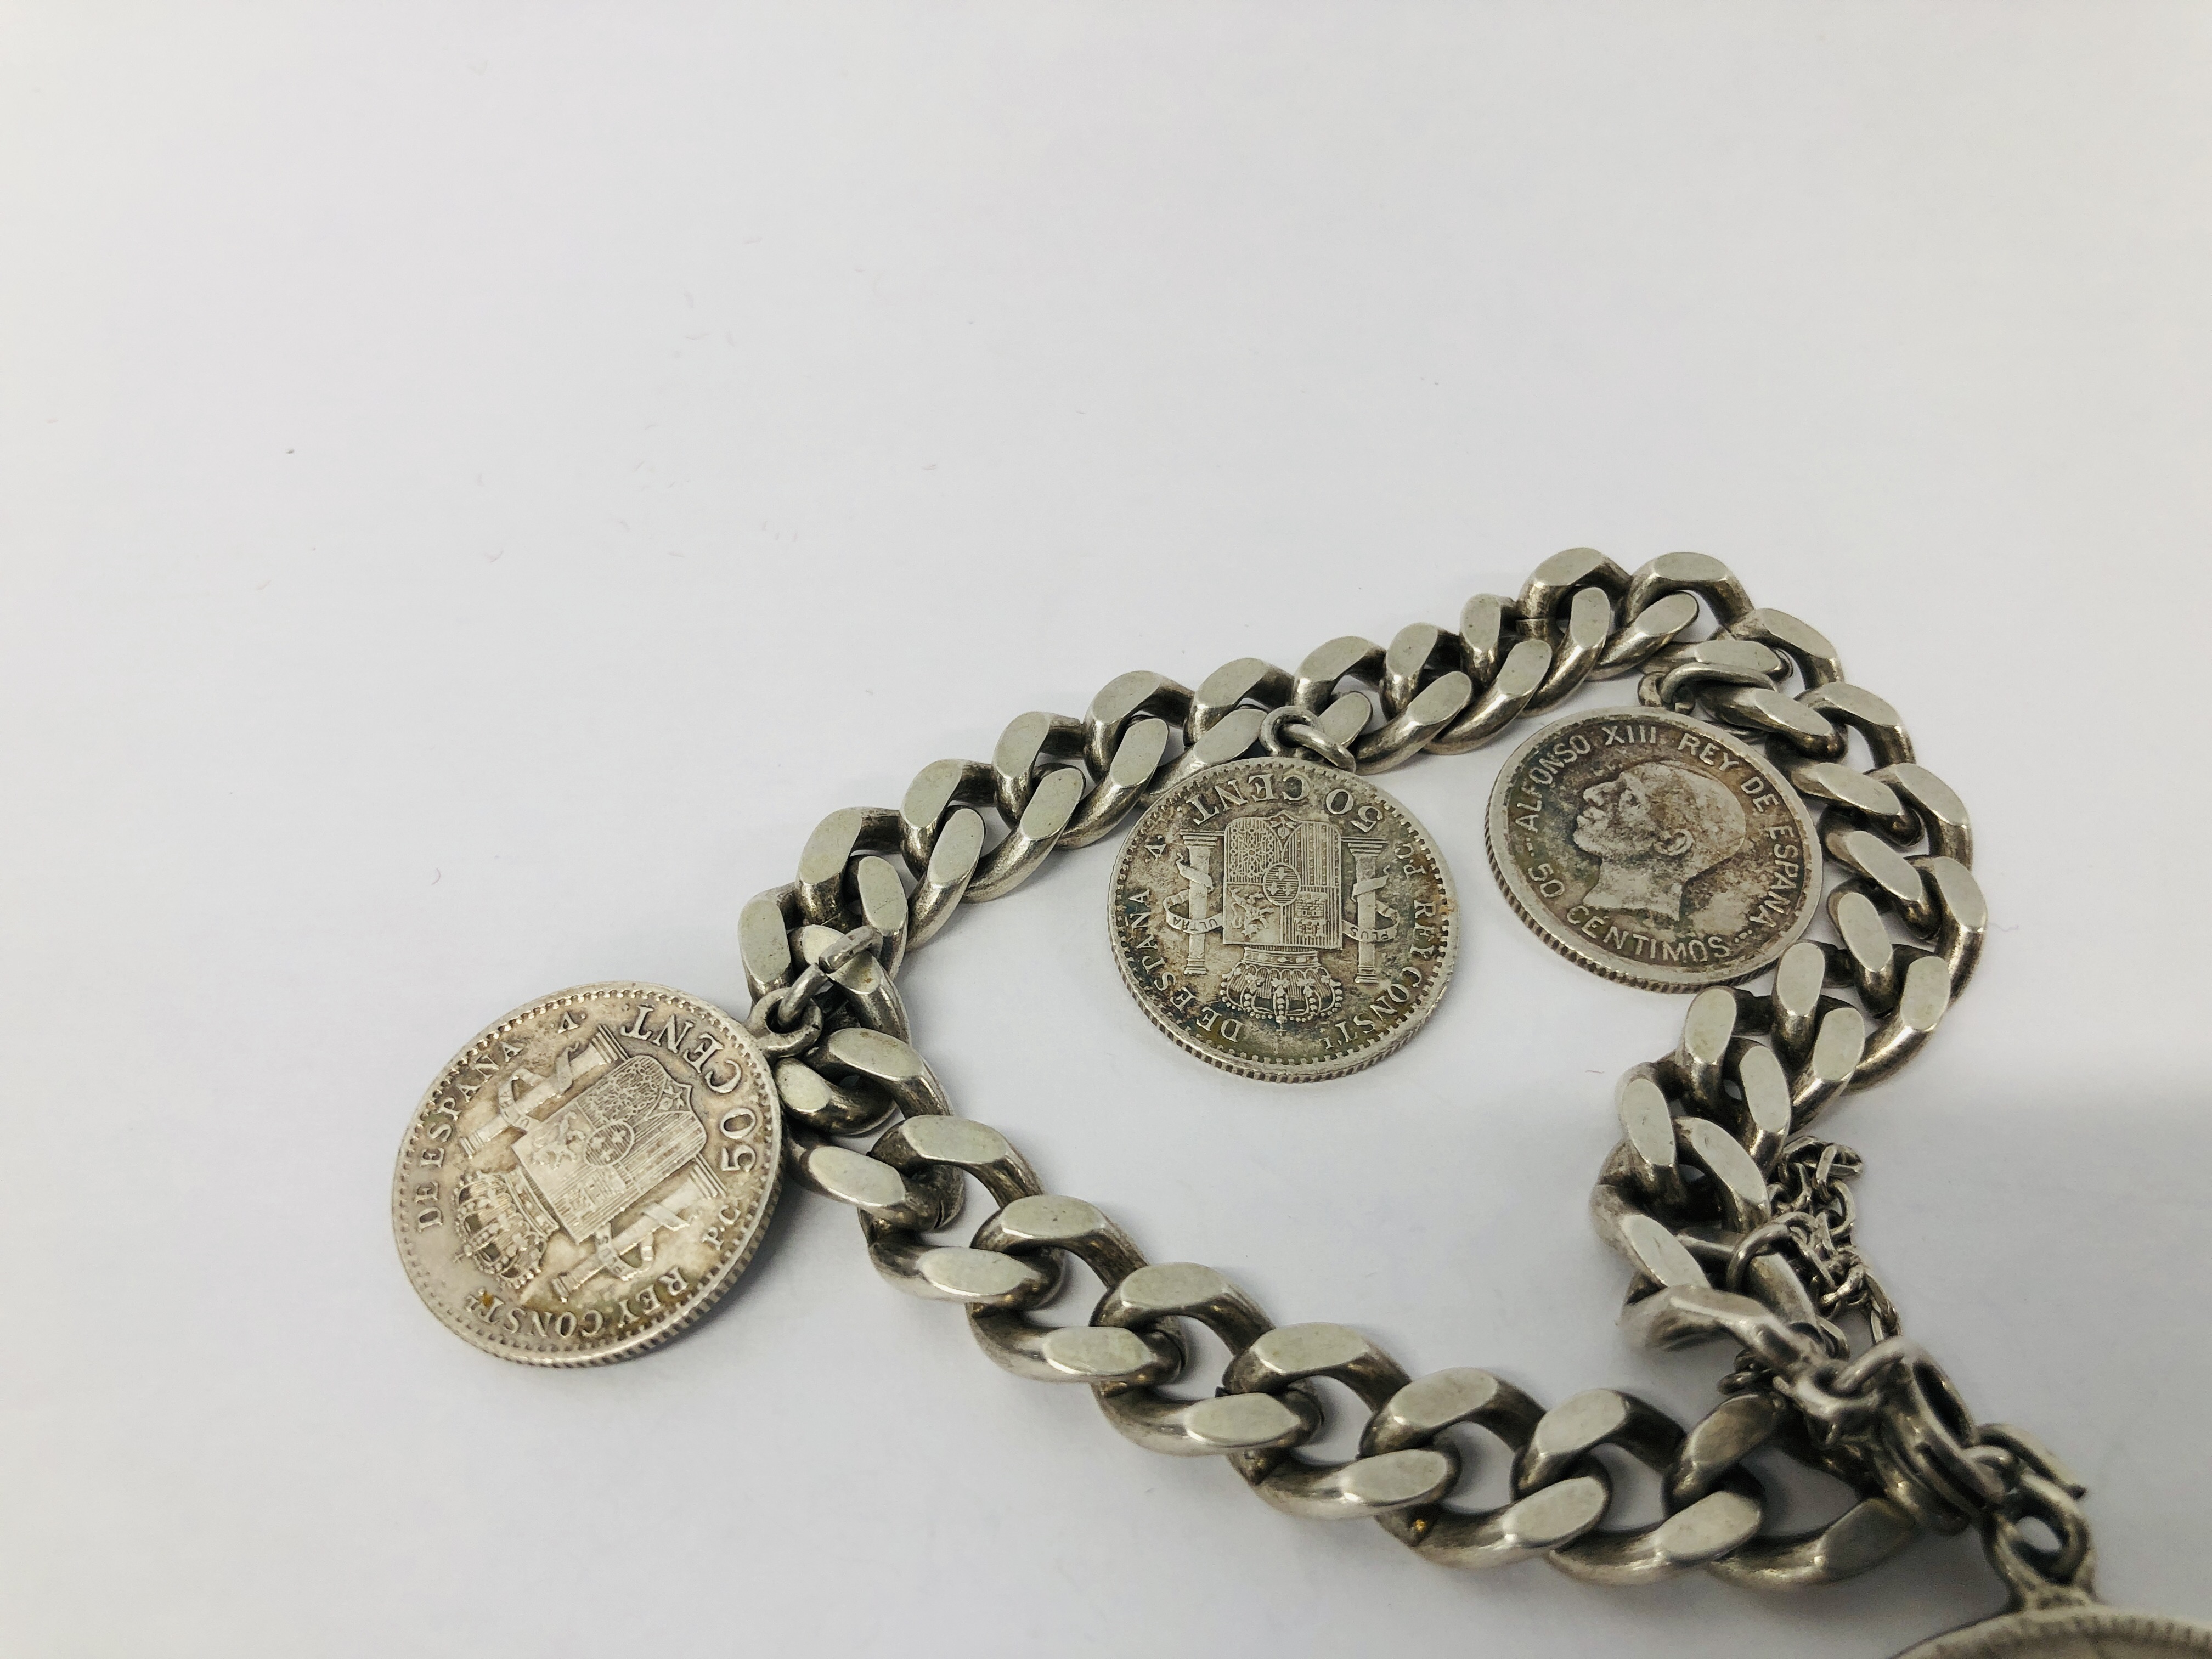 VINTAGE WHITE METAL FLAT LINK CURB BRACELET WITH SAFETY CHAIN HAVING A SPANISH 5 PESETA 1870 COIN - Image 5 of 7